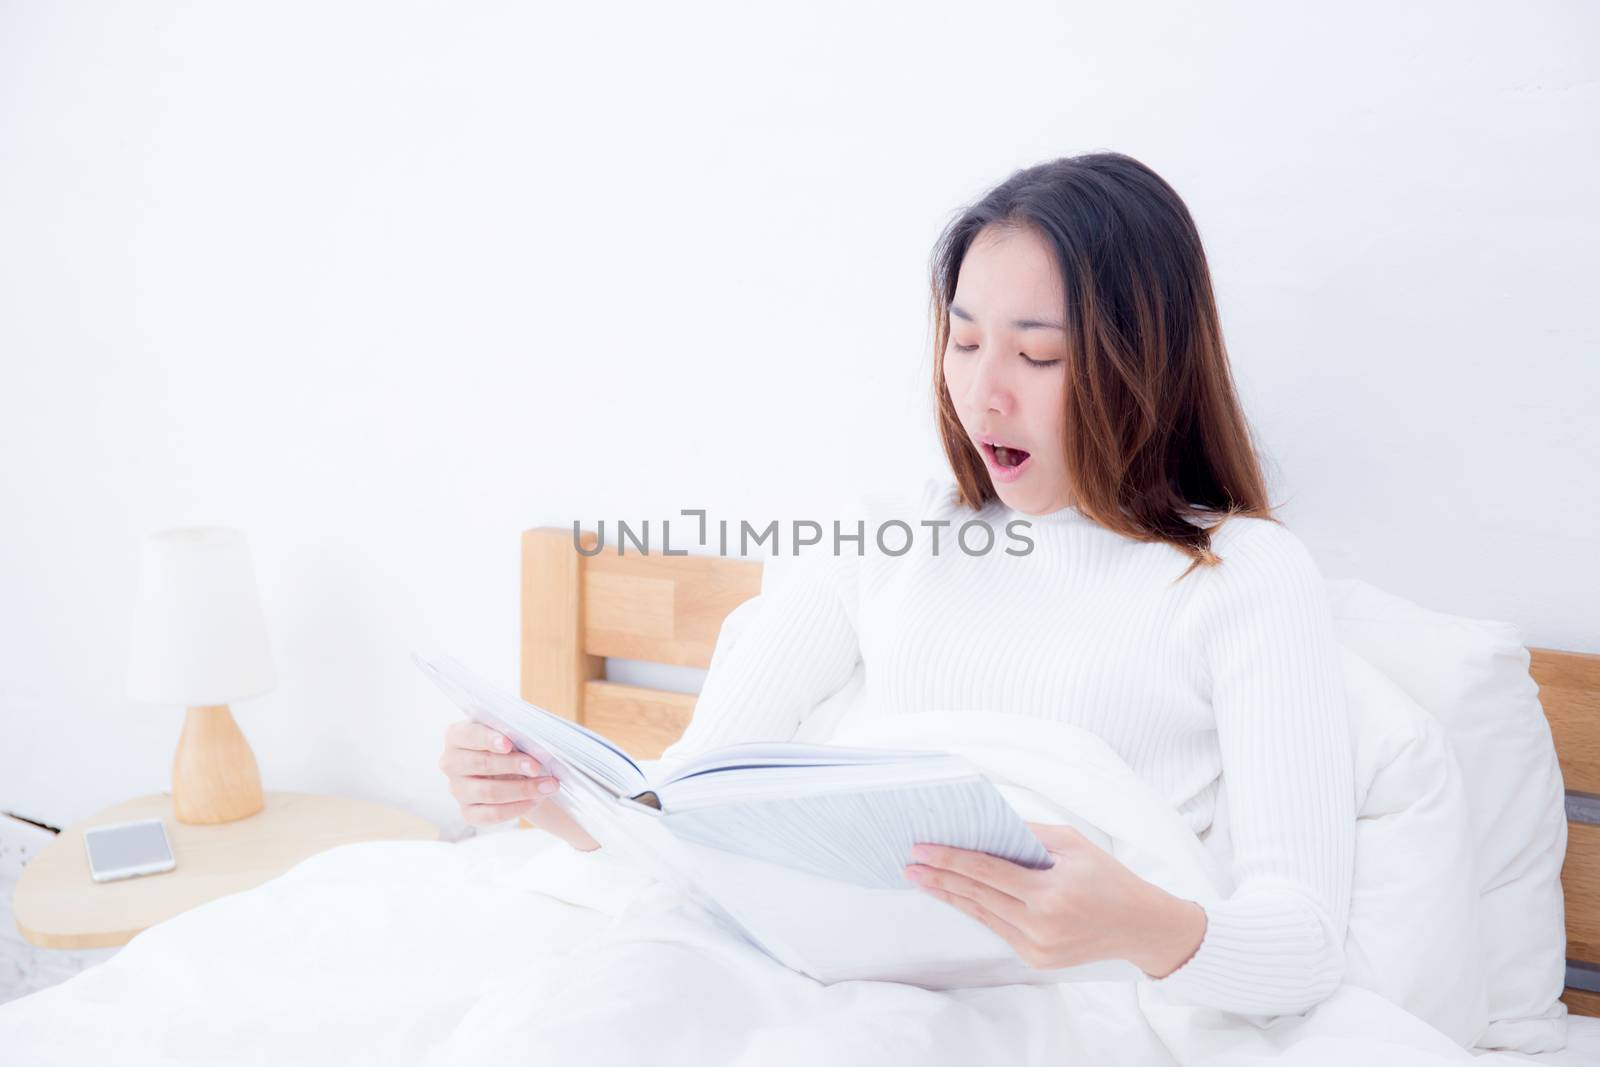 Asian woman reading a book and yawn in bedroom. lifestyle concept.